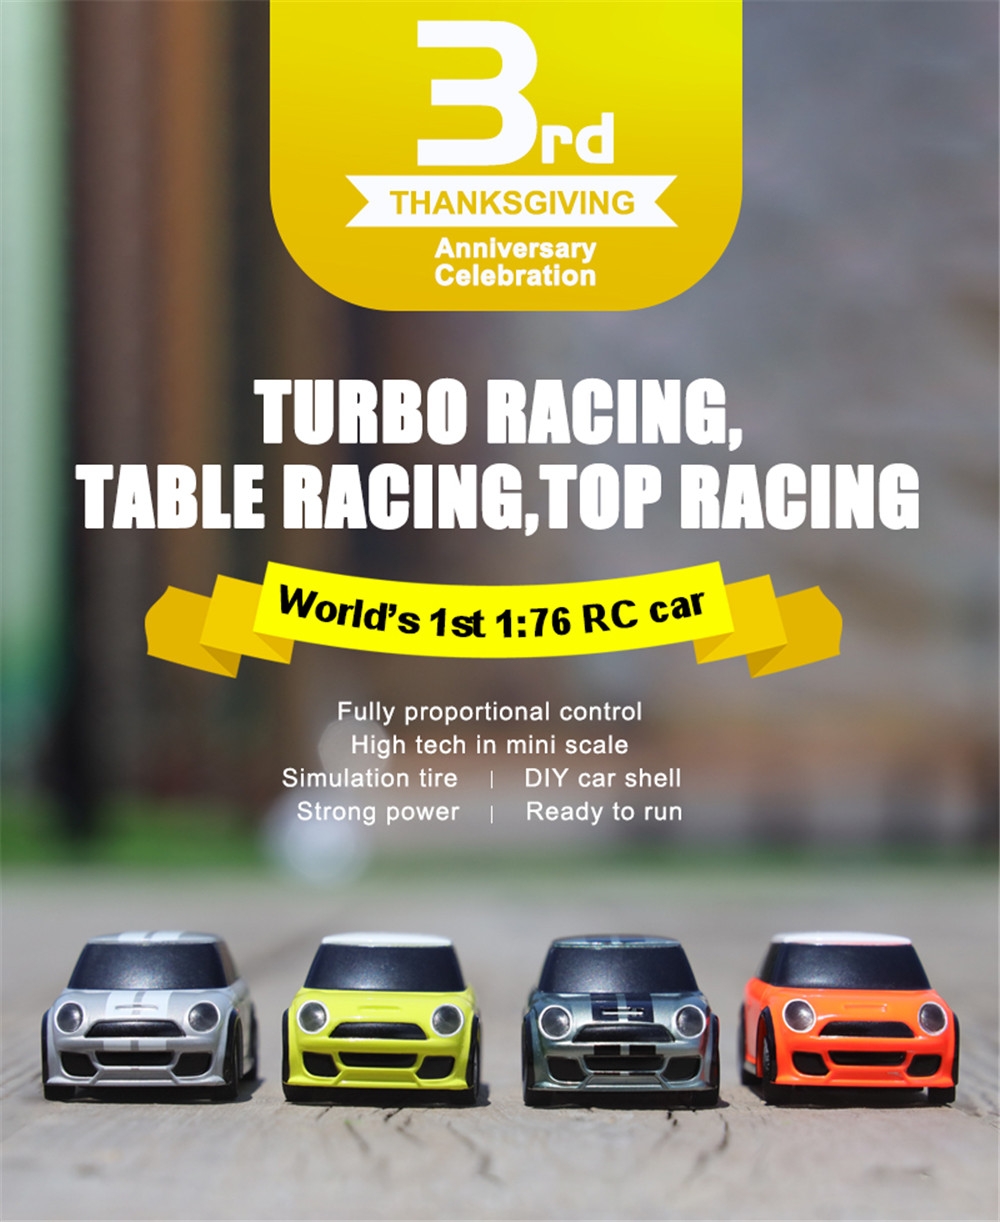 $58.64 for Turbo RTR 1/76 Two RC Cars 3rd Anniversary Kids Toys